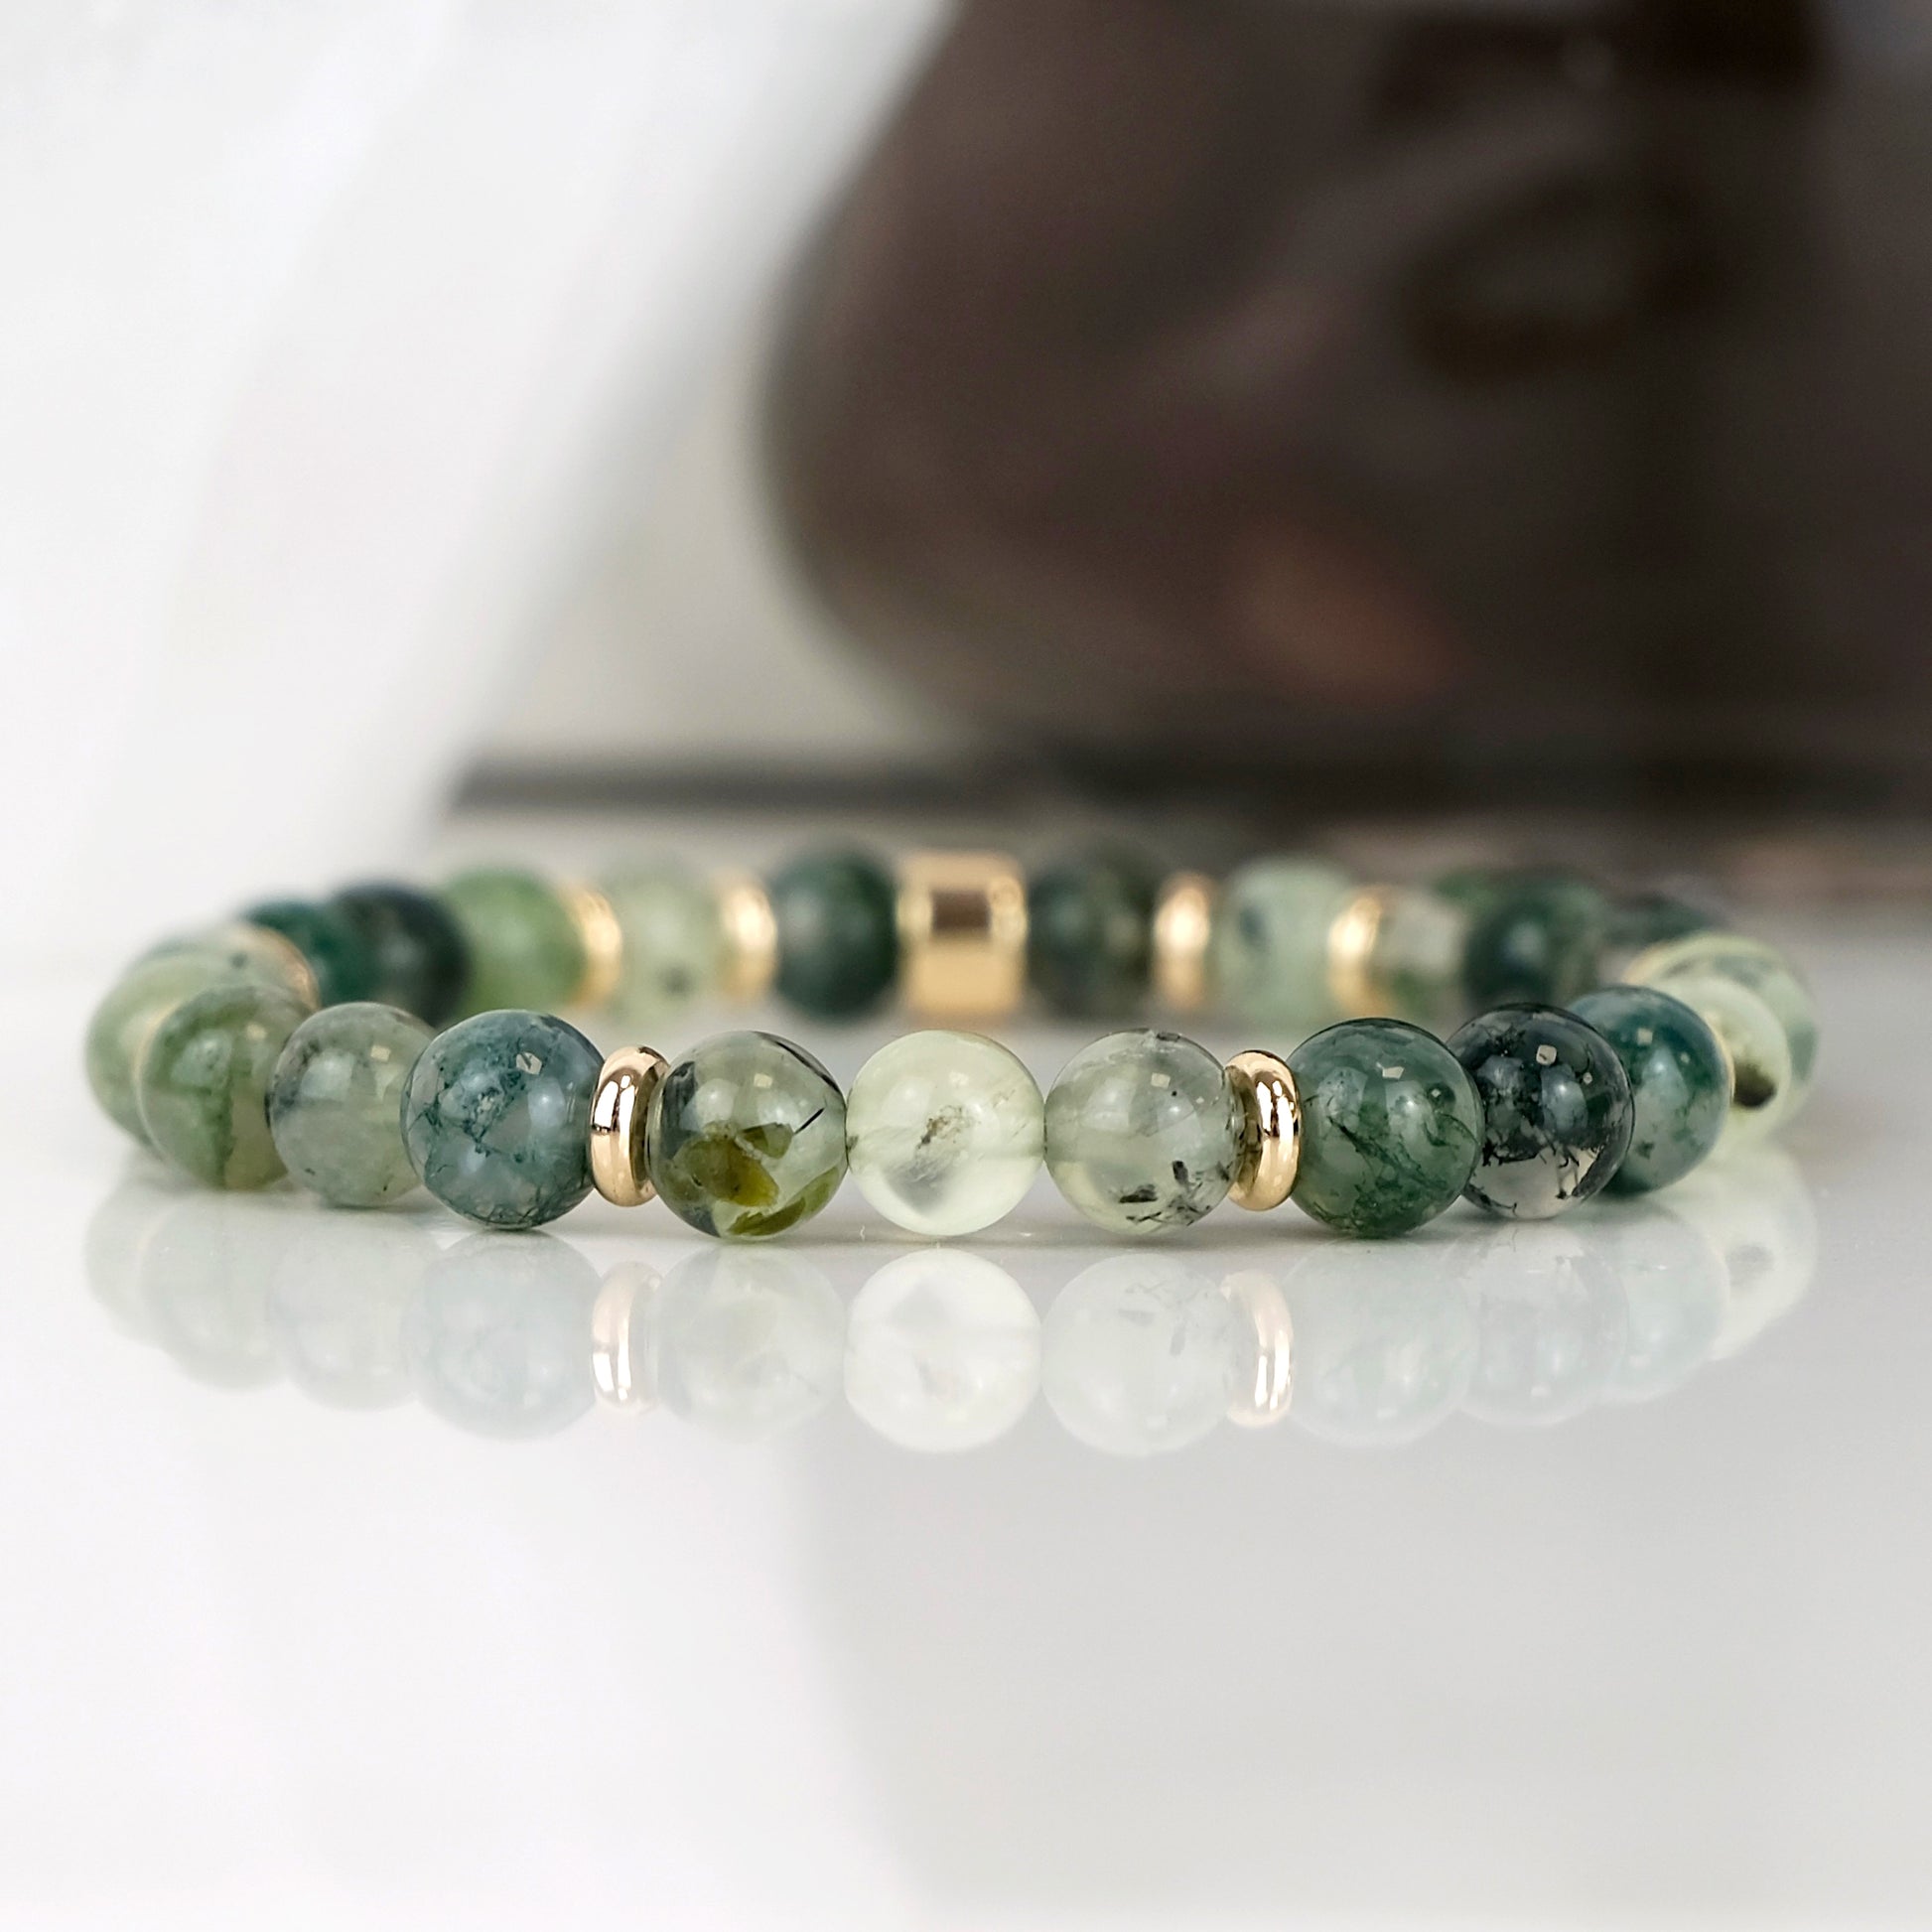 Moss Agate and Prehnite gemstone bracelet in 6mm beads with gold accessories. The bracelet is on a reflective white tile.